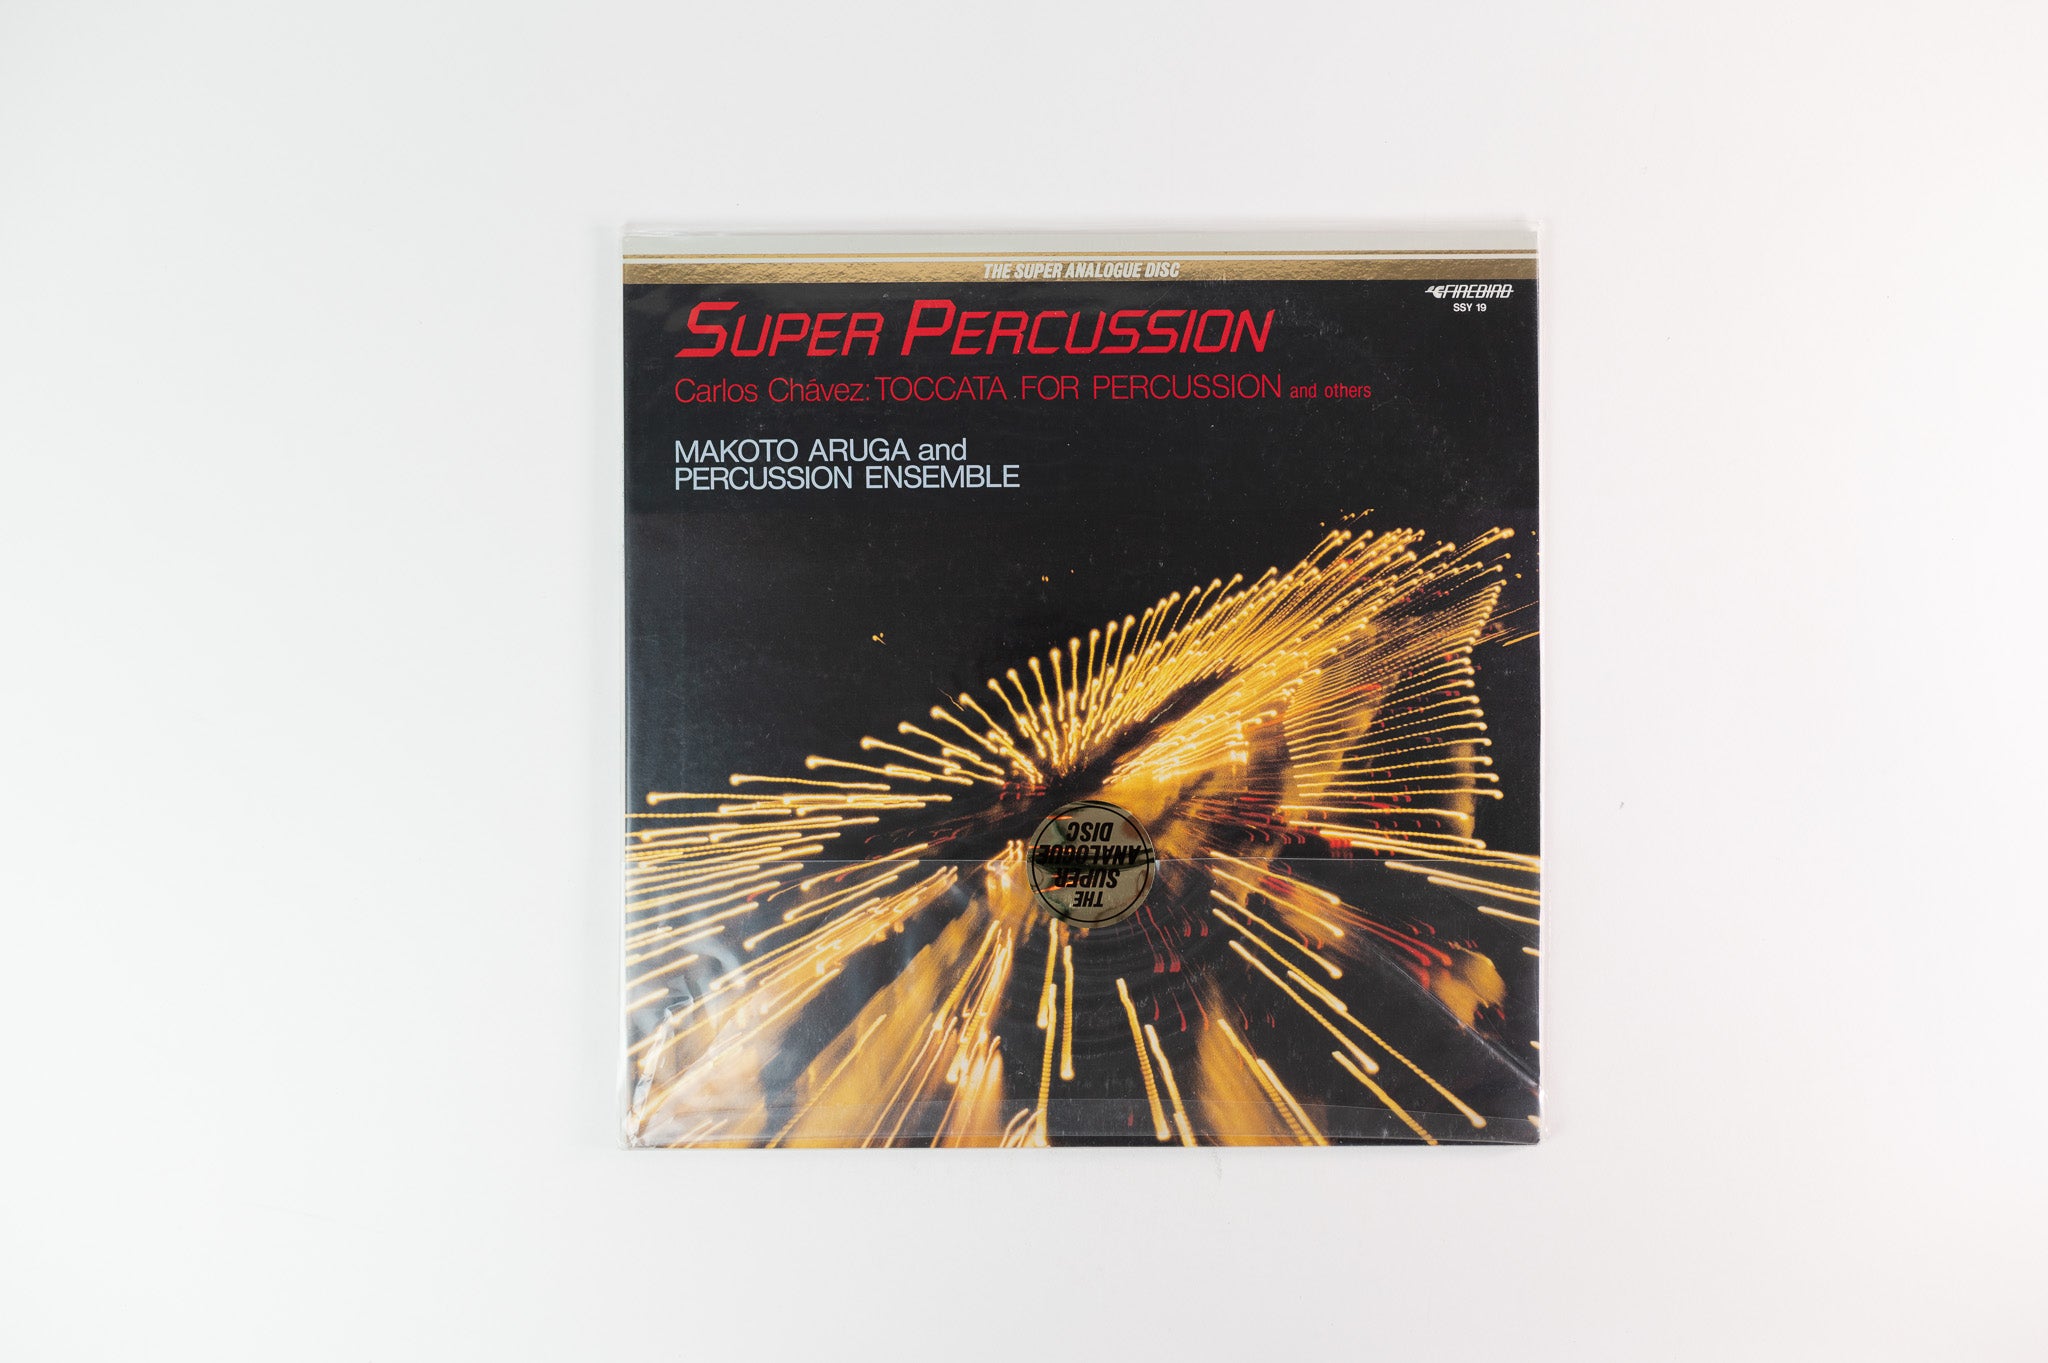 Carlos Chávez - Super Percussion / Toccata For Percussion and Others on Super Analogue Disc Firebird Sealed